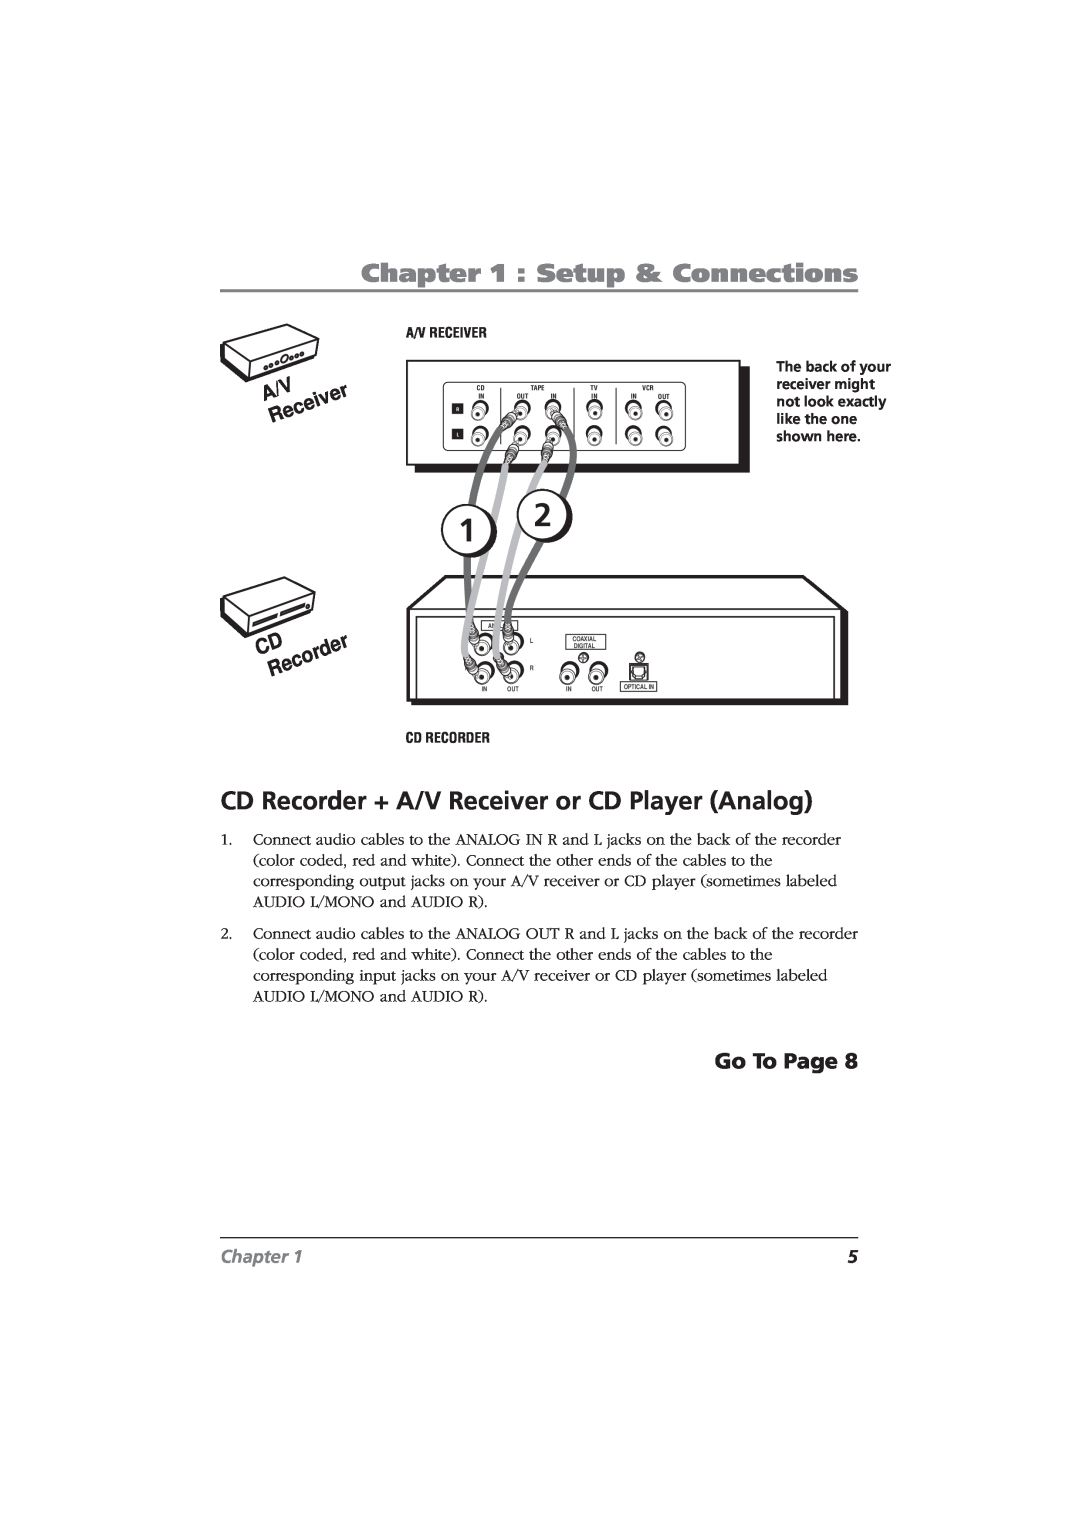 RCA CDRW10 manual CD Recorder + A/V Receiver or CD Player Analog, Setup & Connections, Chapter 